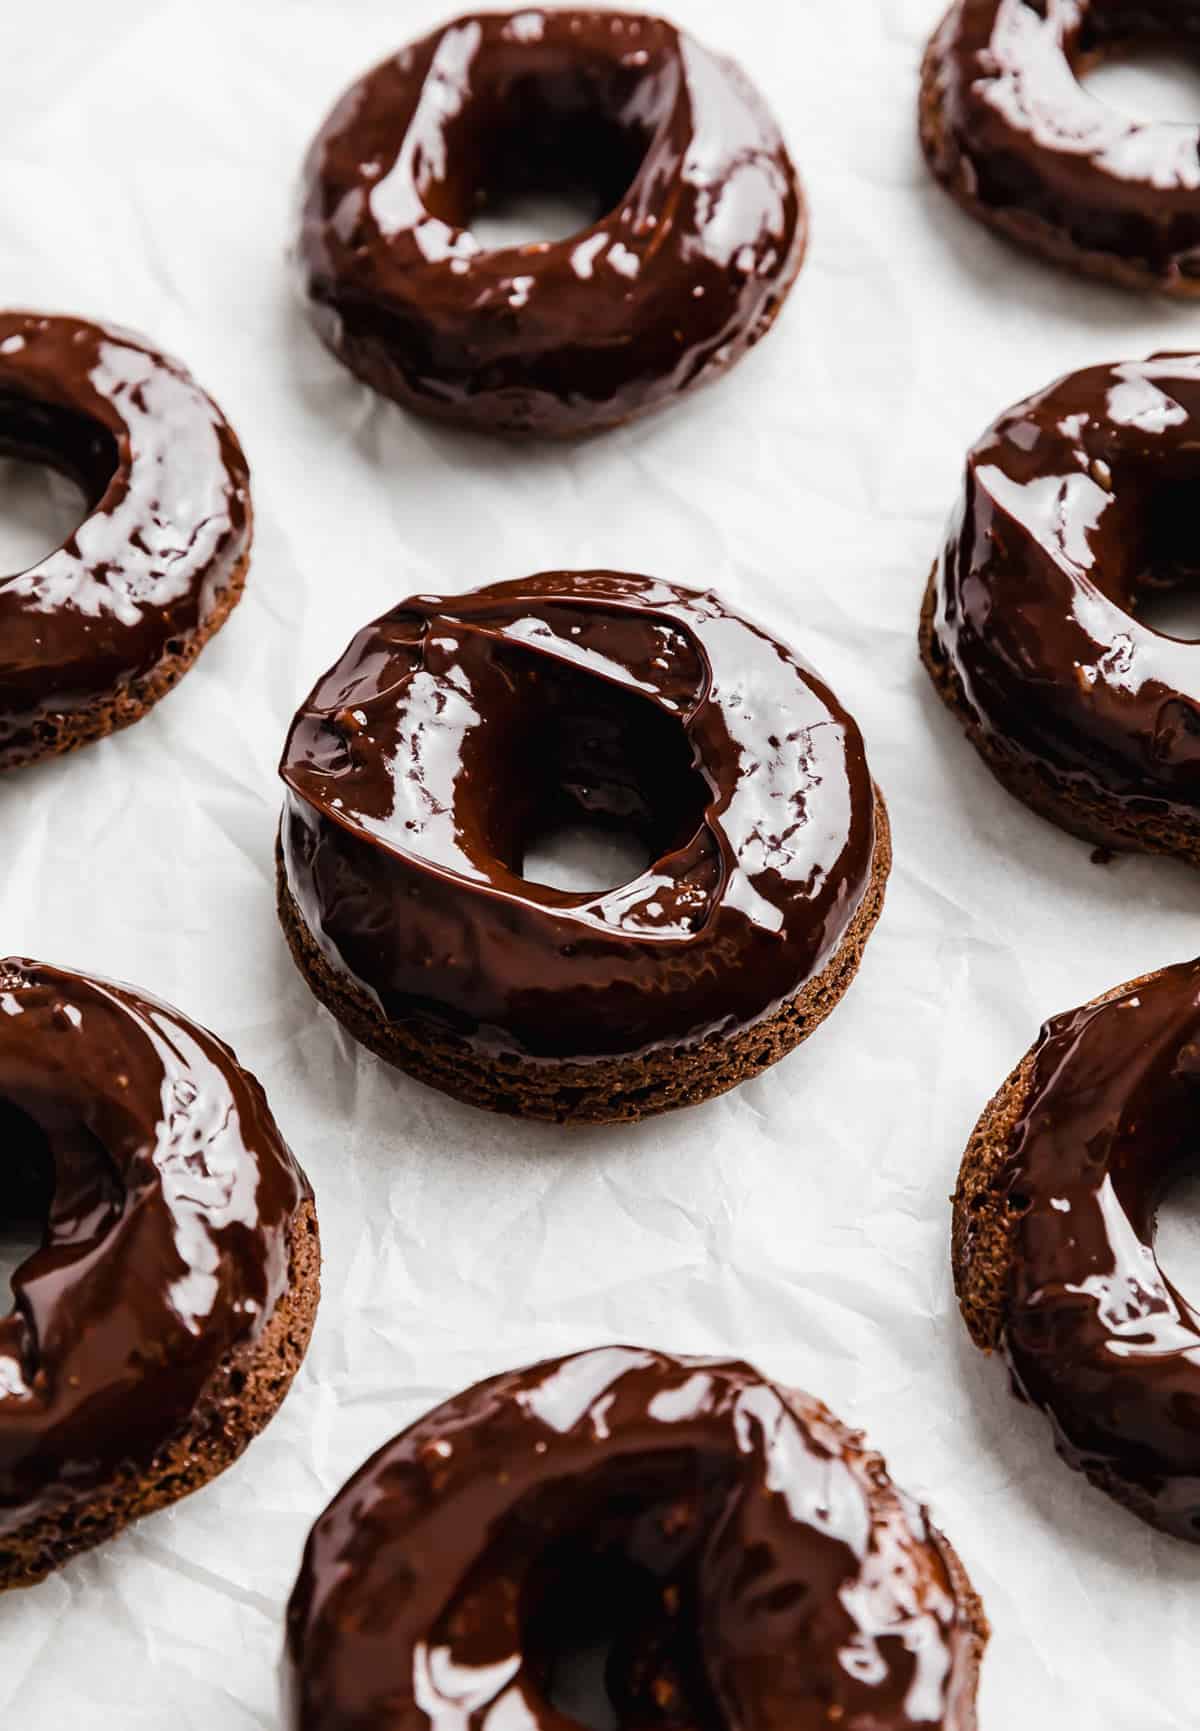 Chocolate Doughnuts topped with a chocolate glaze on white background.